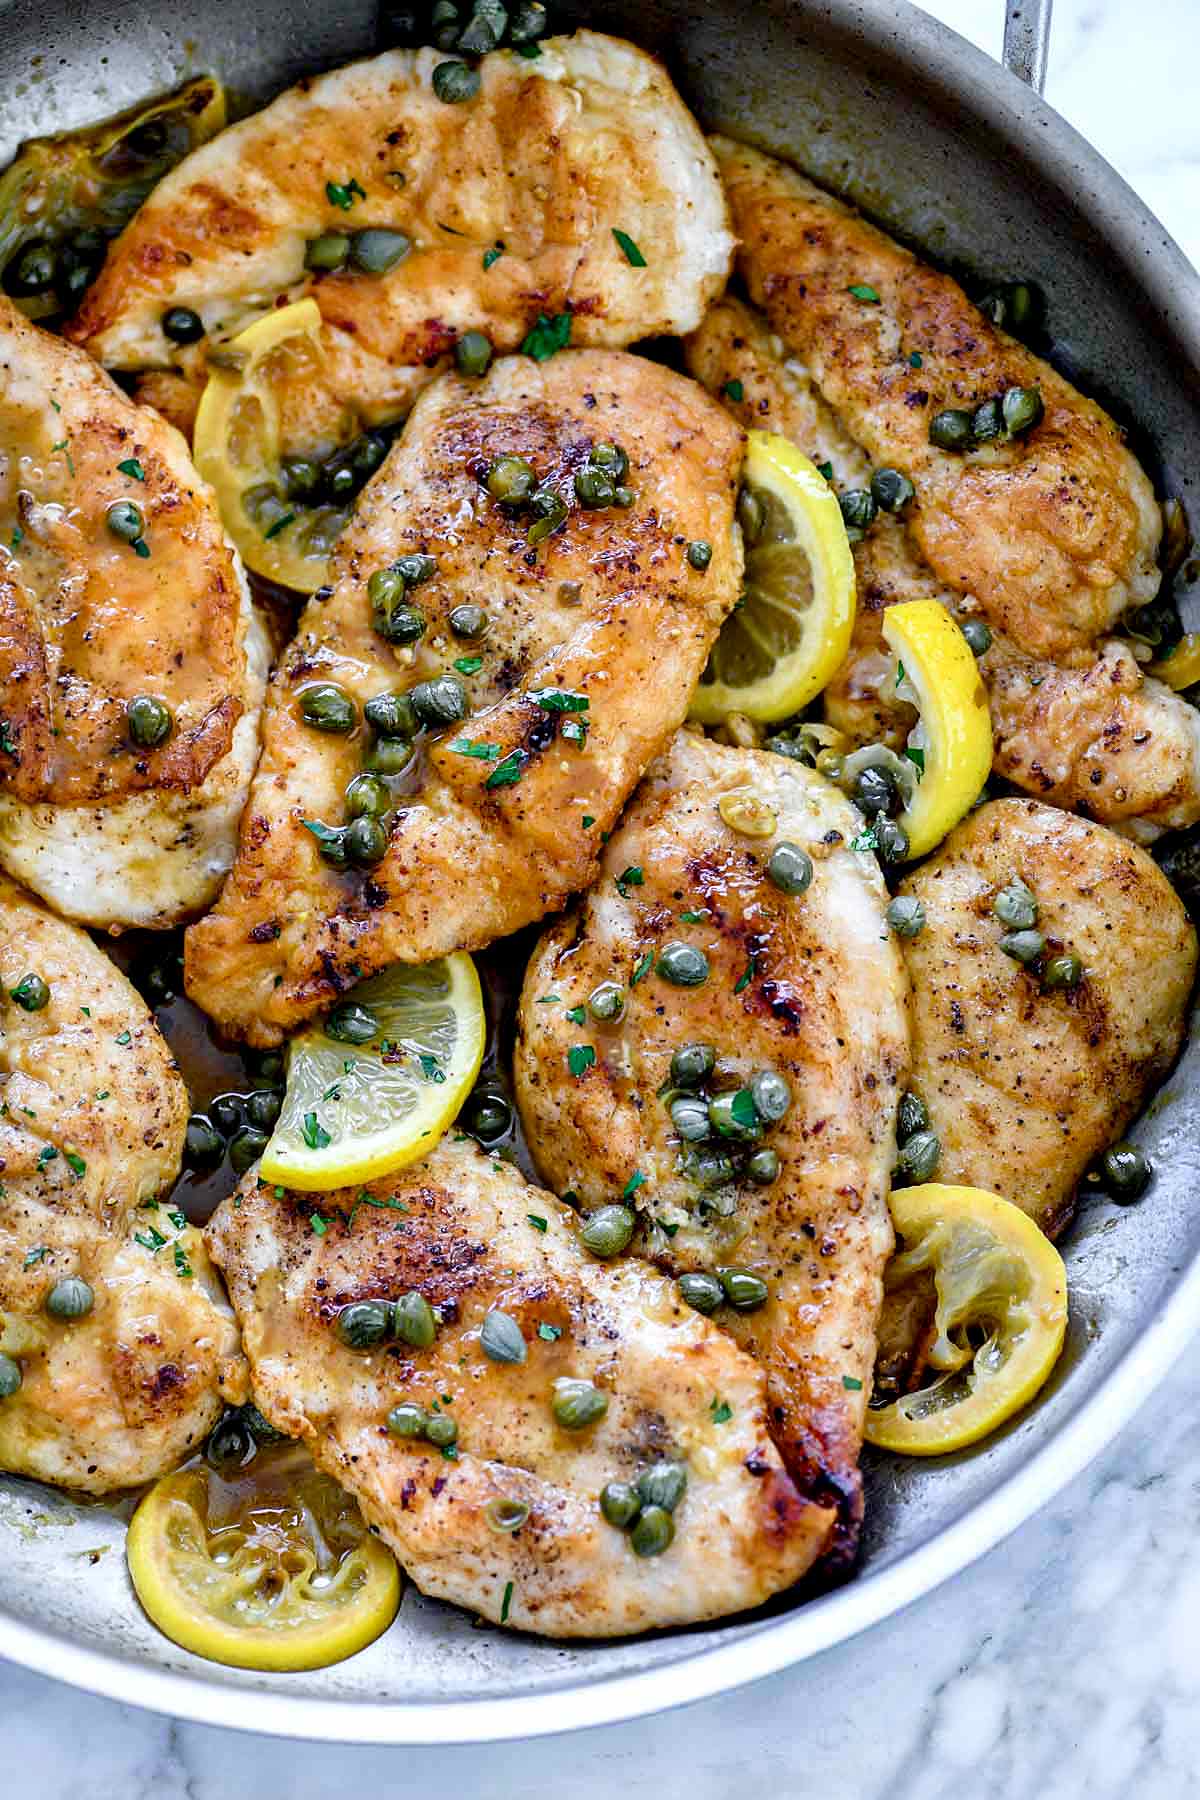 Clean Food Crush Recipes With Chicken: Step by Step Guide  